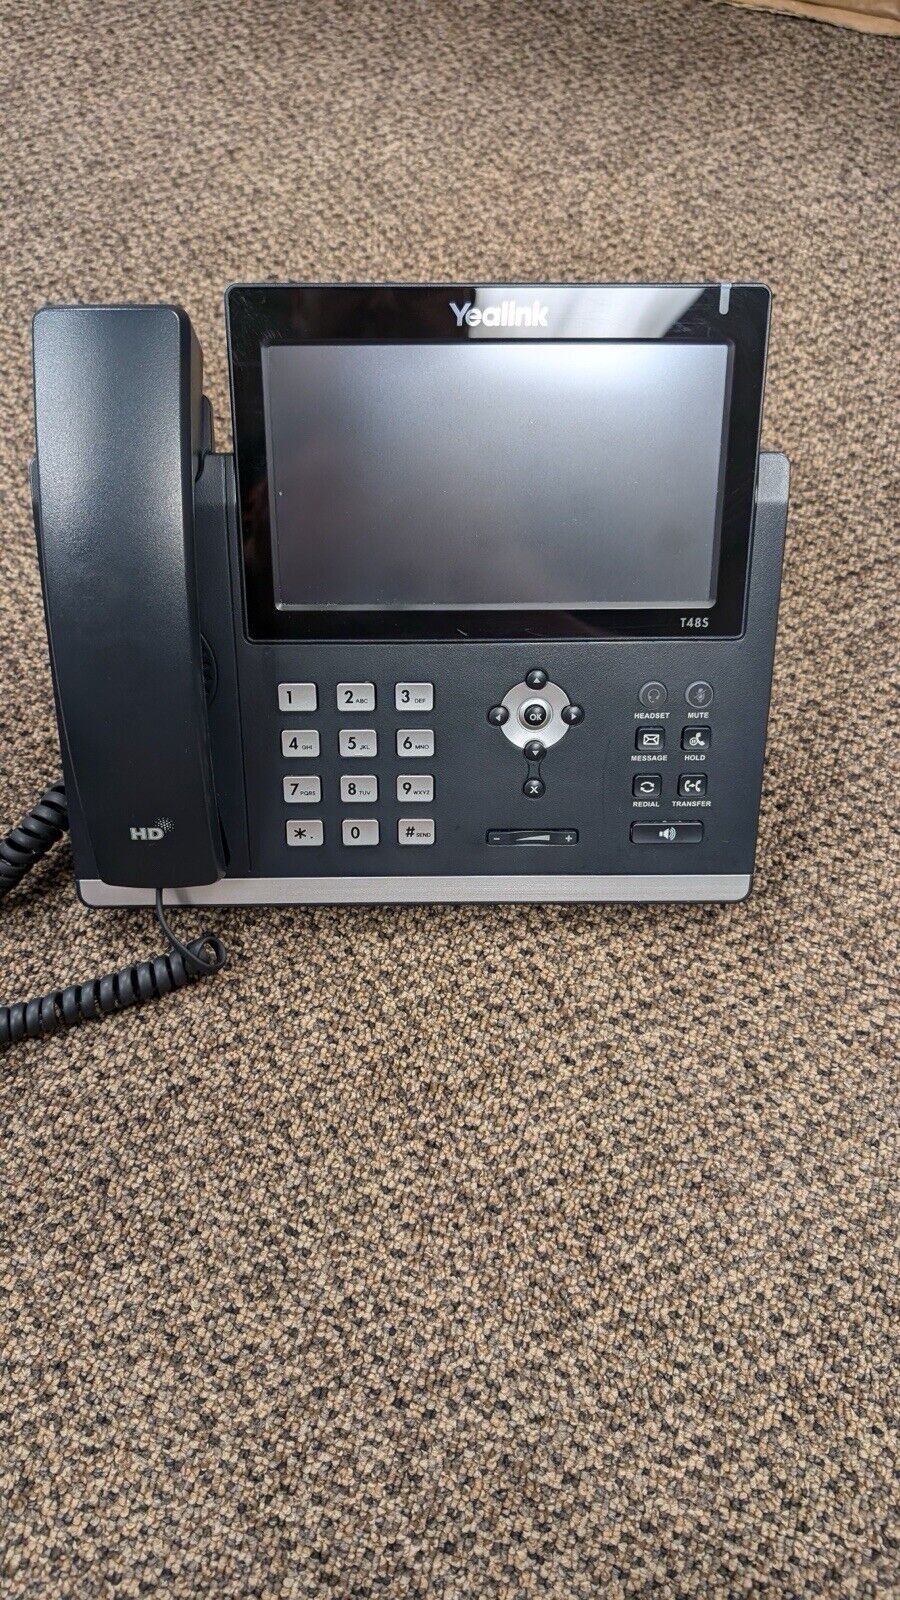 Yealink SIP-T48S Ultra-Elegant 16 Lines 7-inch Touch Screen VoIP Phone W/ Wi-Fi